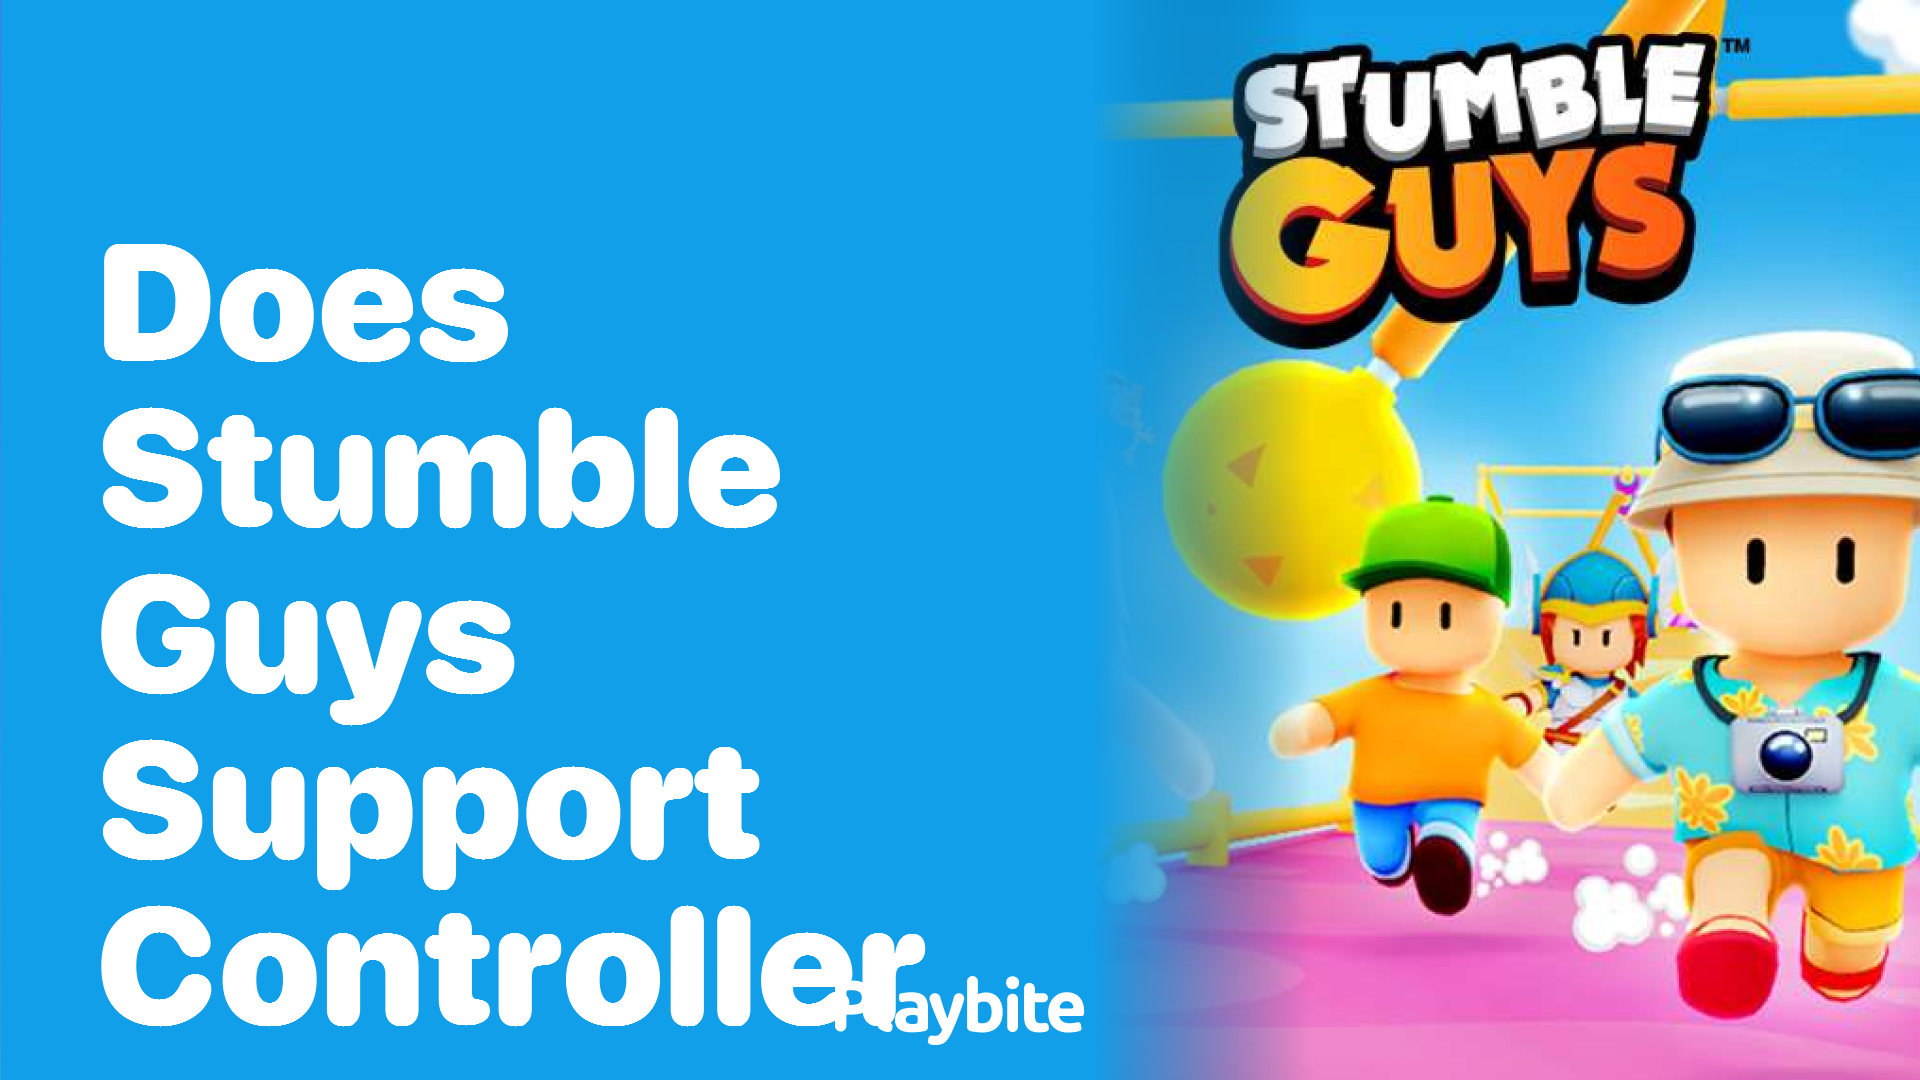 Does Stumble Guys Support Controller Use?